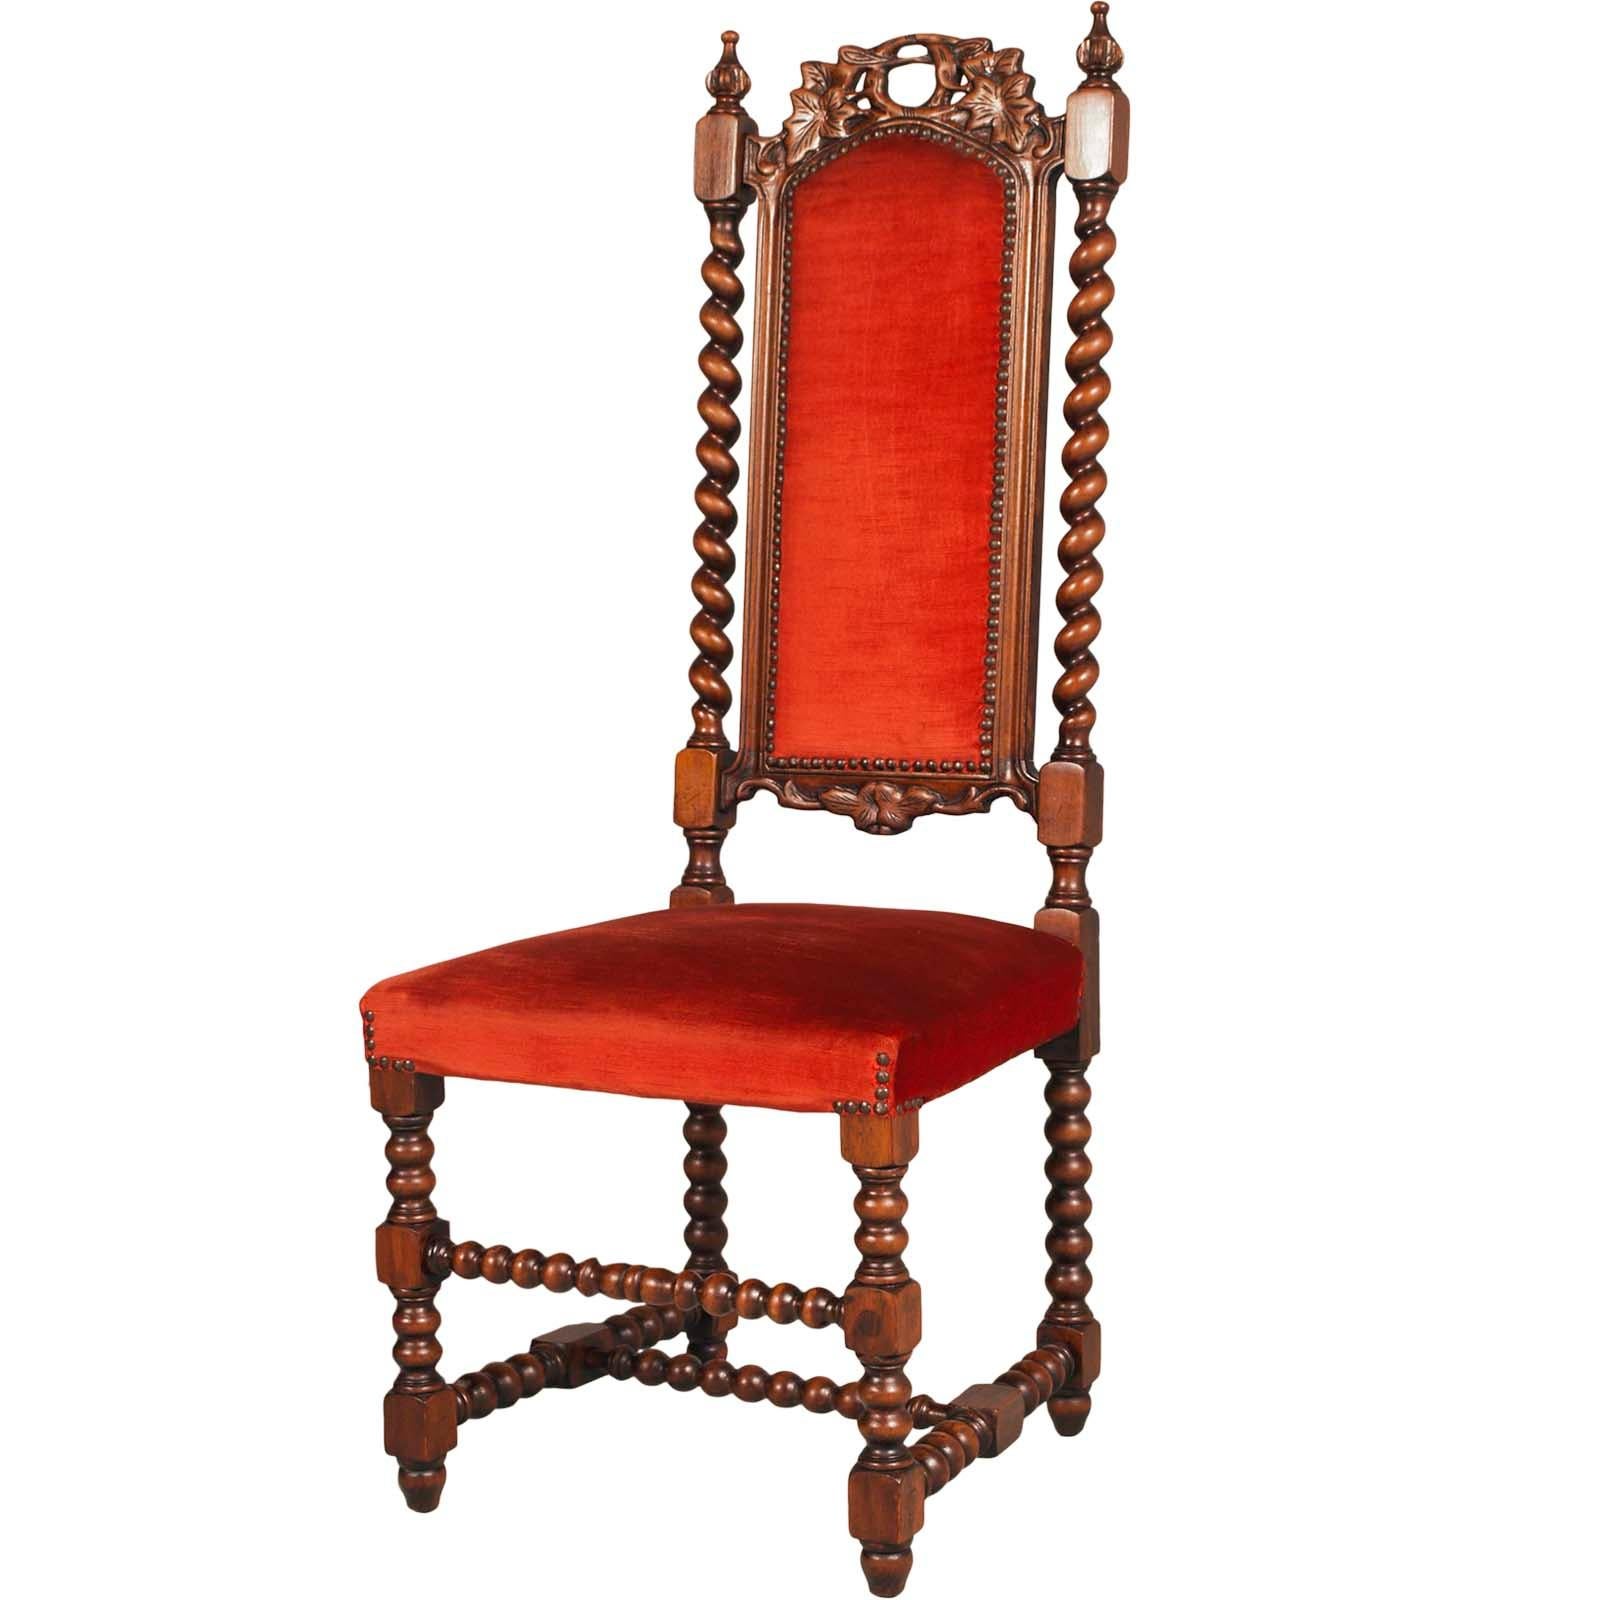 Late 19th century pairs Venetian hall chairs by Atelier Cadorin, in wood of walnut, hand carved.
The two chairs are upholstered with original red velvet fabric. One of the two seats has a slight tear, which does not disfigure the seat, but will be